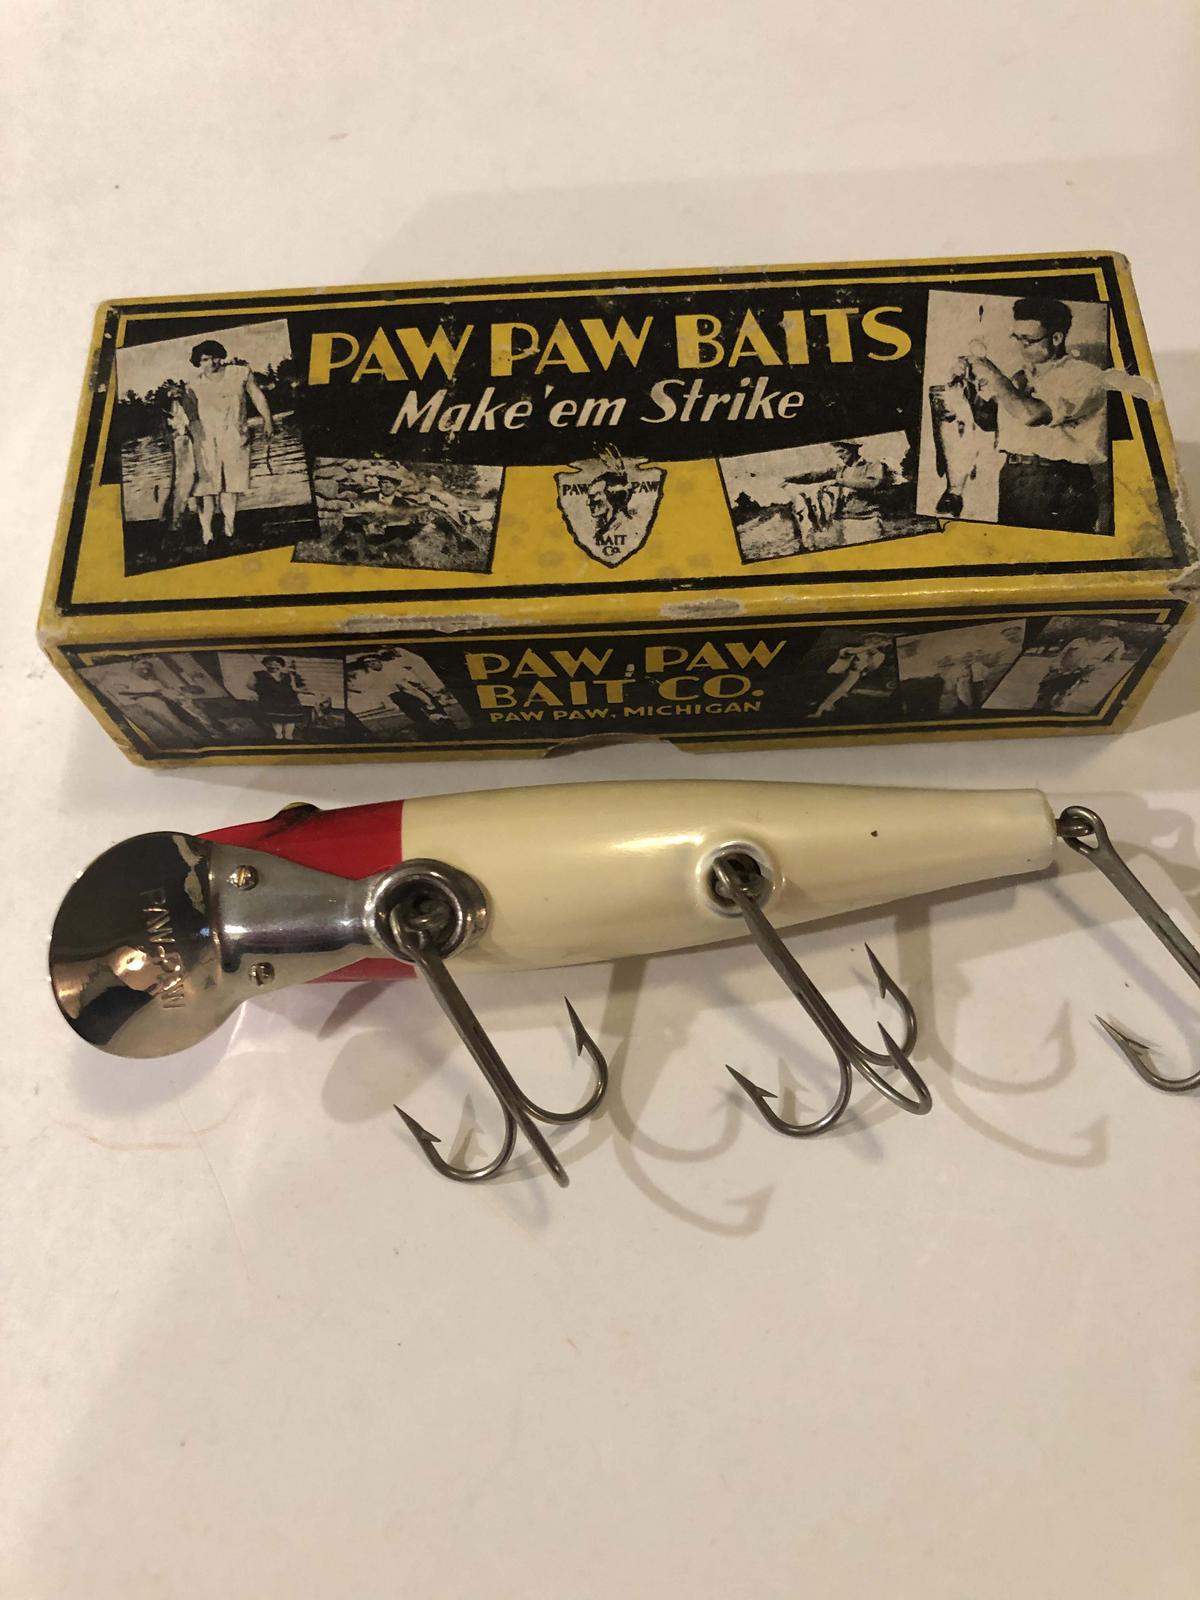 PAW PAW SEARS Wood Chest used empty Fishing Lure Wood Field Tackle Box  $110.00 - PicClick